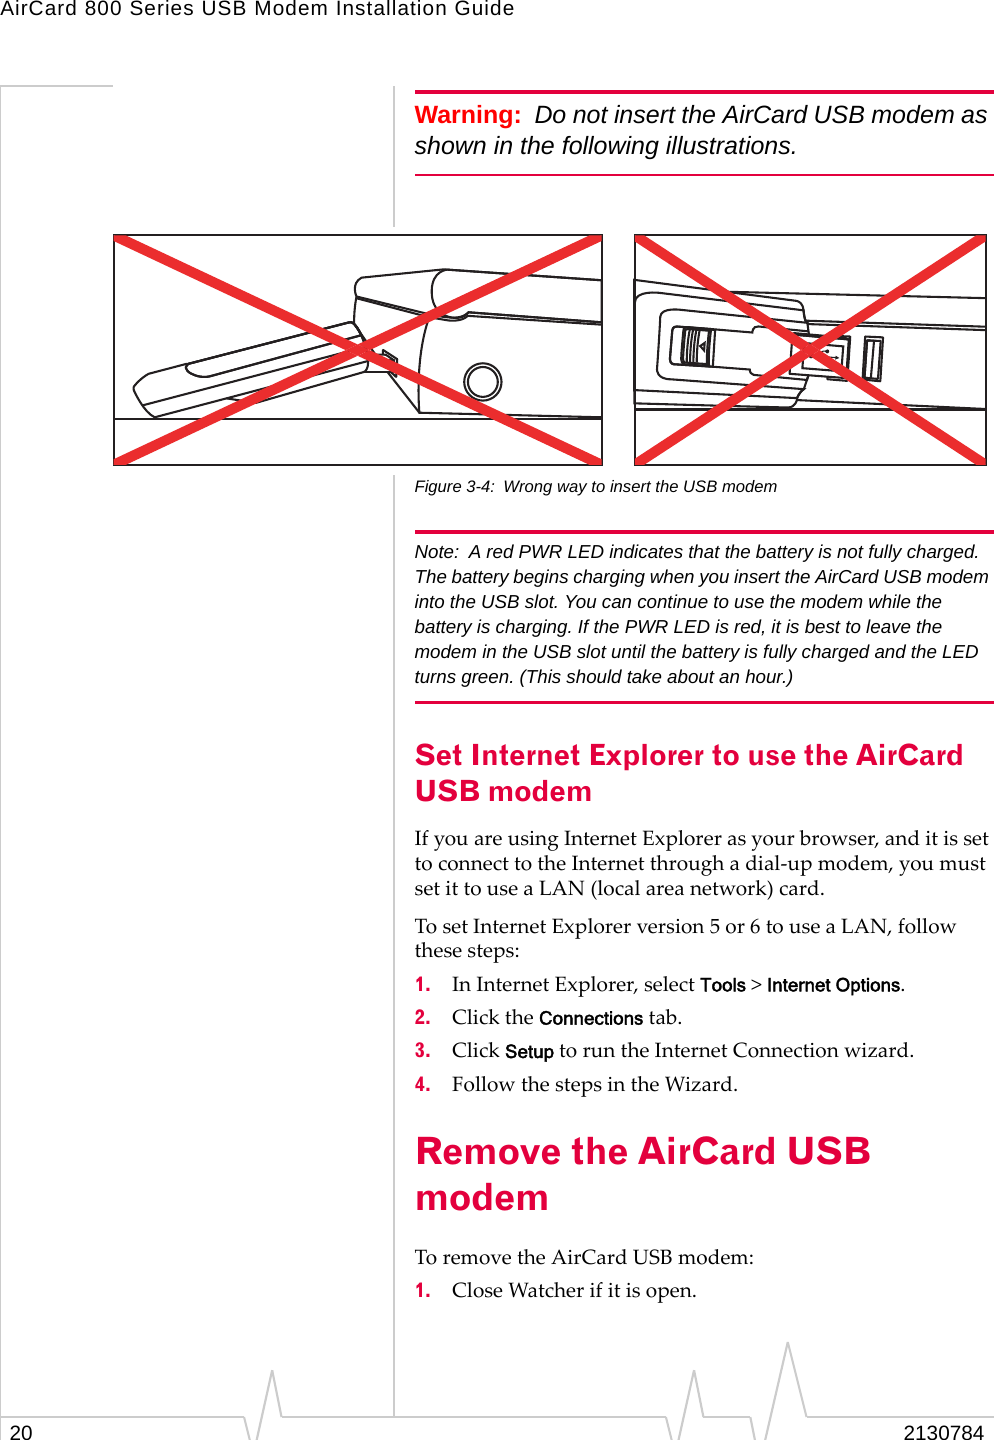 AirCard 800 Series USB Modem Installation Guide20 2130784Warning: Do not insert the AirCard USB modem as shown in the following illustrations.Figure 3-4: Wrong way to insert the USB modemNote: A red PWR LED indicates that the battery is not fully charged. The battery begins charging when you insert the AirCard USB modem into the USB slot. You can continue to use the modem while the battery is charging. If the PWR LED is red, it is best to leave the modem in the USB slot until the battery is fully charged and the LED turns green. (This should take about an hour.)Set Internet Explorer to use the AirCard USB modemIfyouareusingInternetExplorerasyourbrowser,anditissettoconnecttotheInternetthroughadial‐upmodem,youmustsetittouseaLAN(localareanetwork)card.TosetInternetExplorerversion5or6touseaLAN,followthesesteps:1. InInternetExplorer,selectTools&gt;Internet Options.2. ClicktheConnectionstab.3. ClickSetuptoruntheInternetConnectionwizard.4. FollowthestepsintheWizard.Remove the AirCard USB modem ToremovetheAirCardUSBmodem:1. CloseWatcherifitisopen.